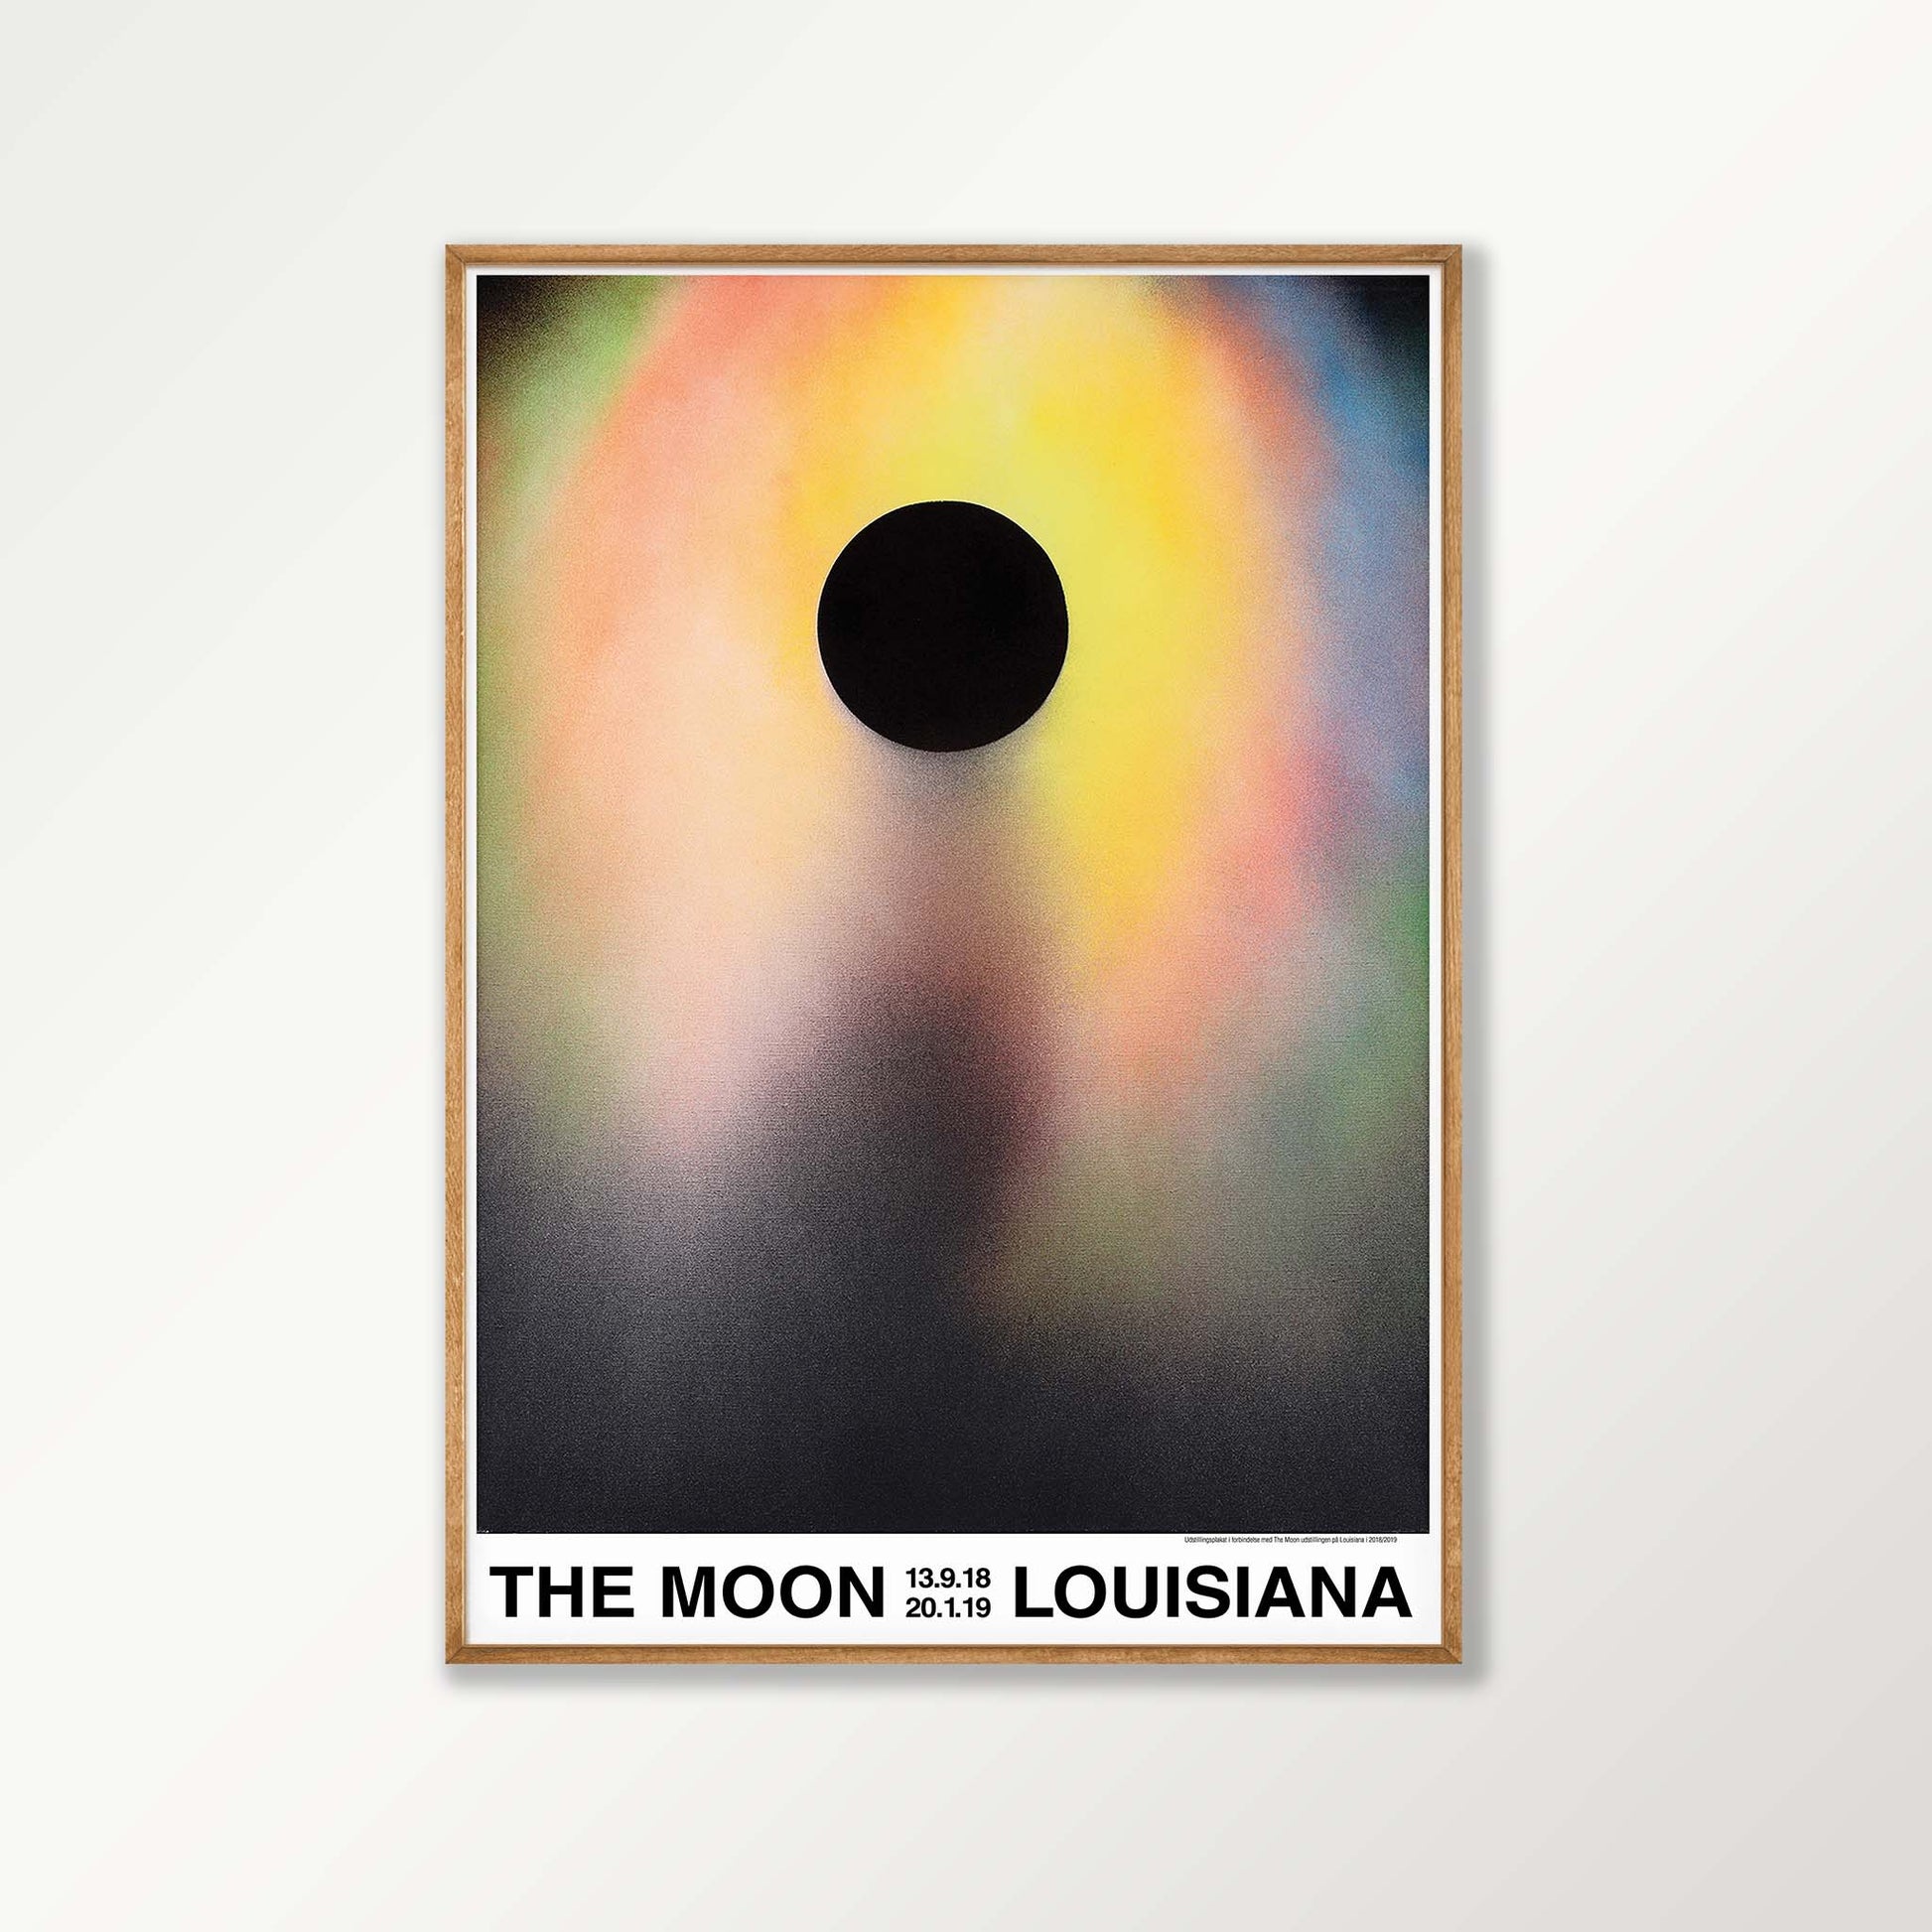 The Moon Exhibition Poster